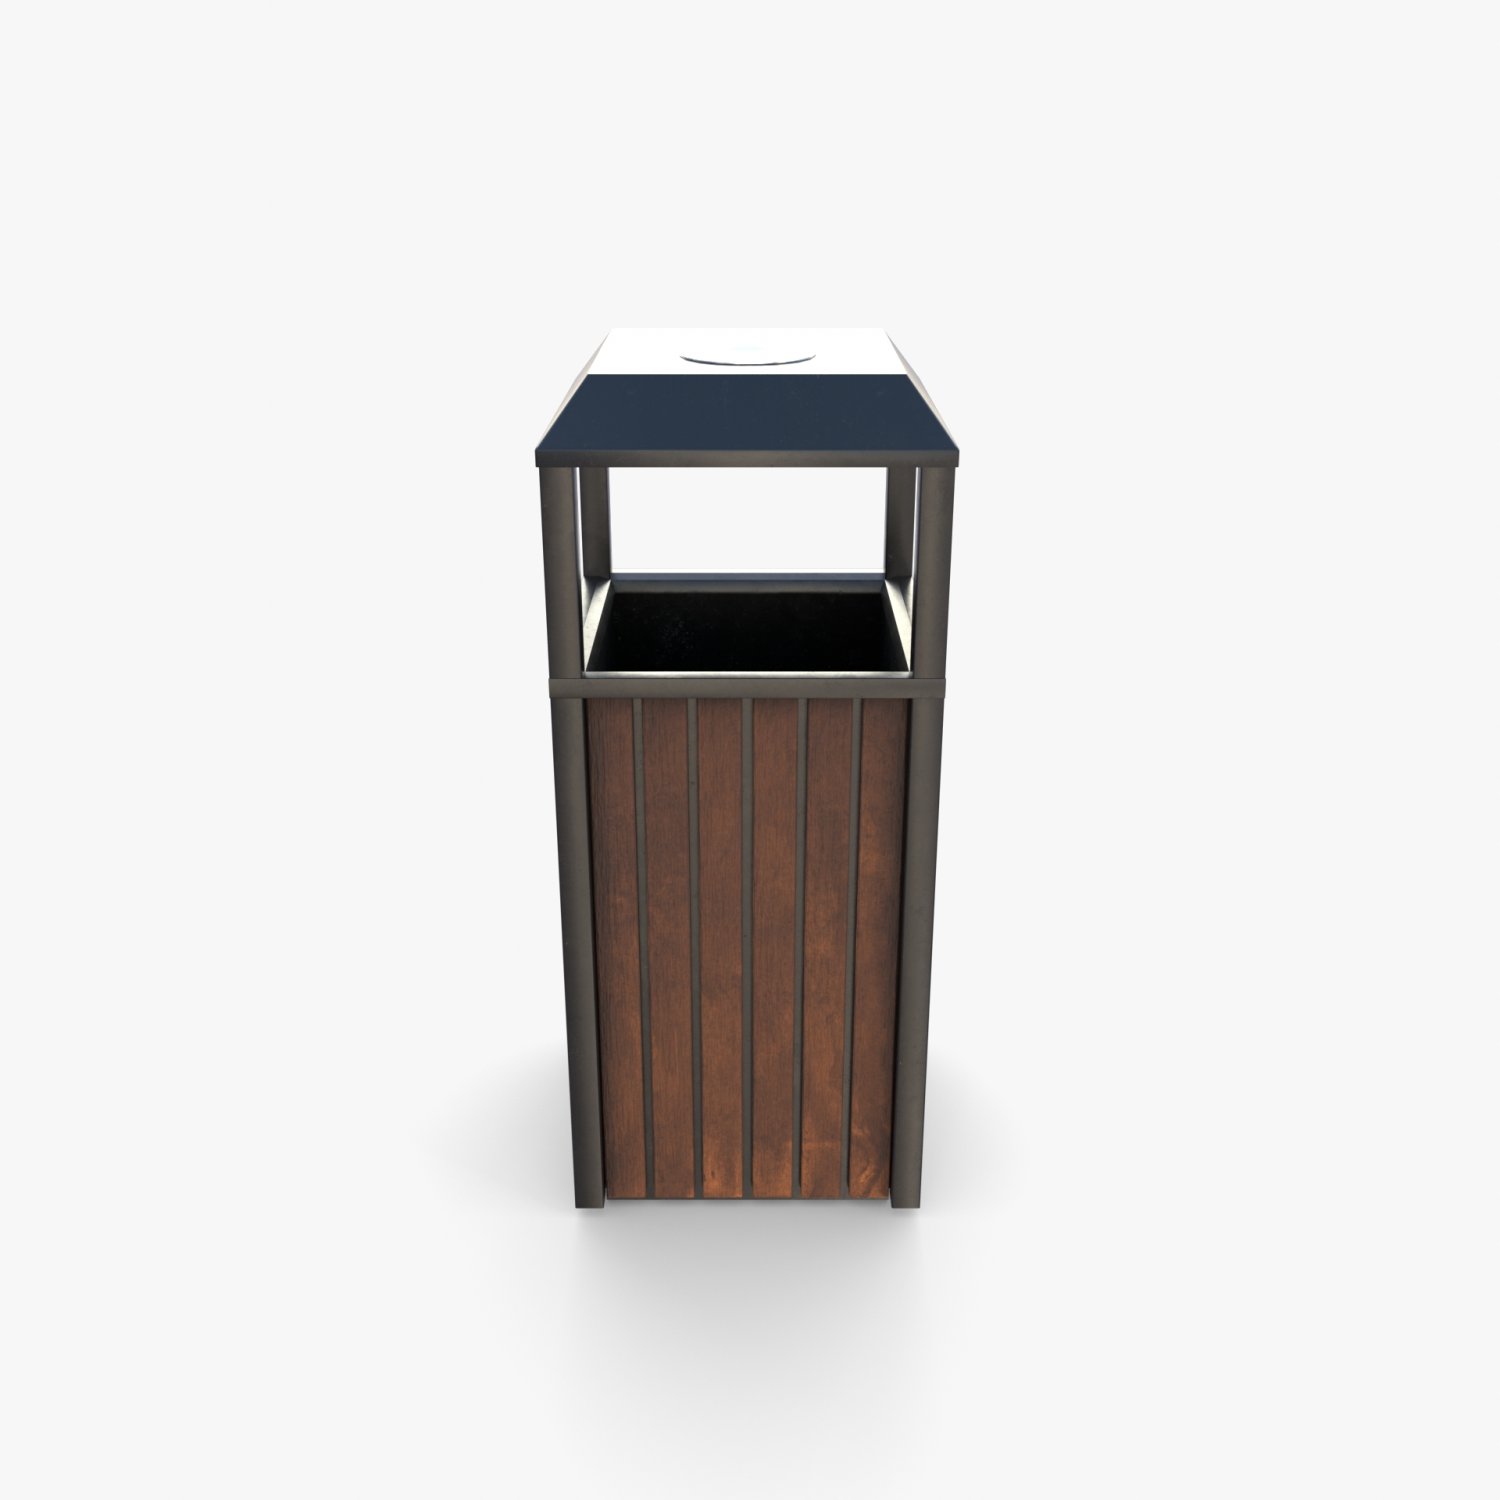 3D model office trash can VR / AR / low-poly